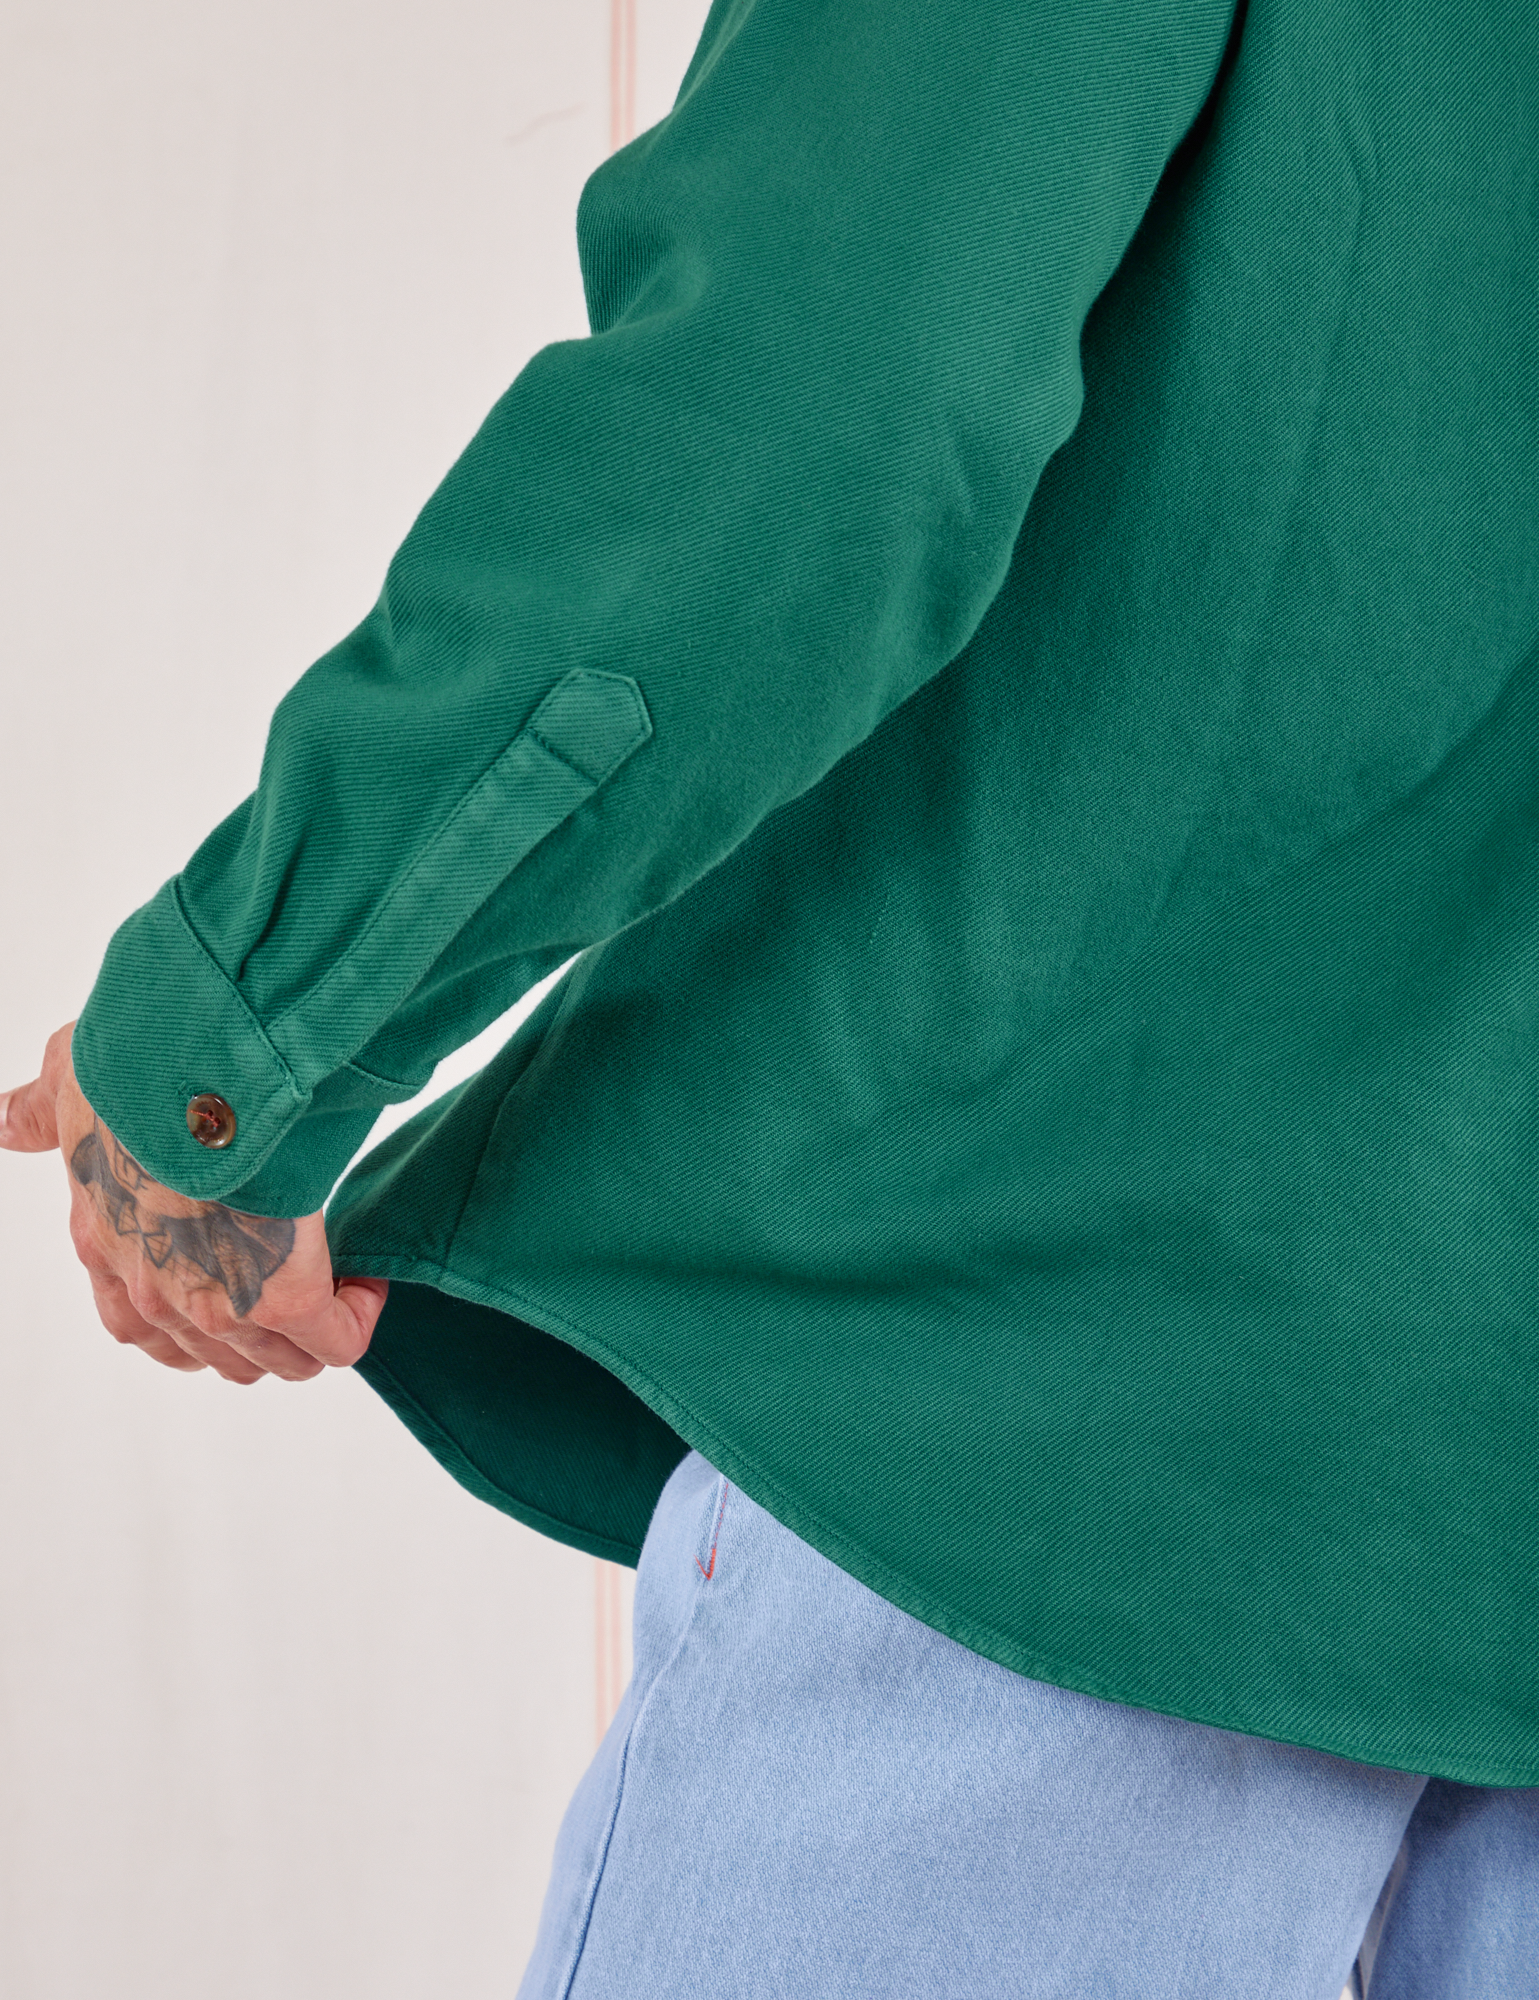 Bottom close up of Flannel Overshirt in Hunter Green on Jesse